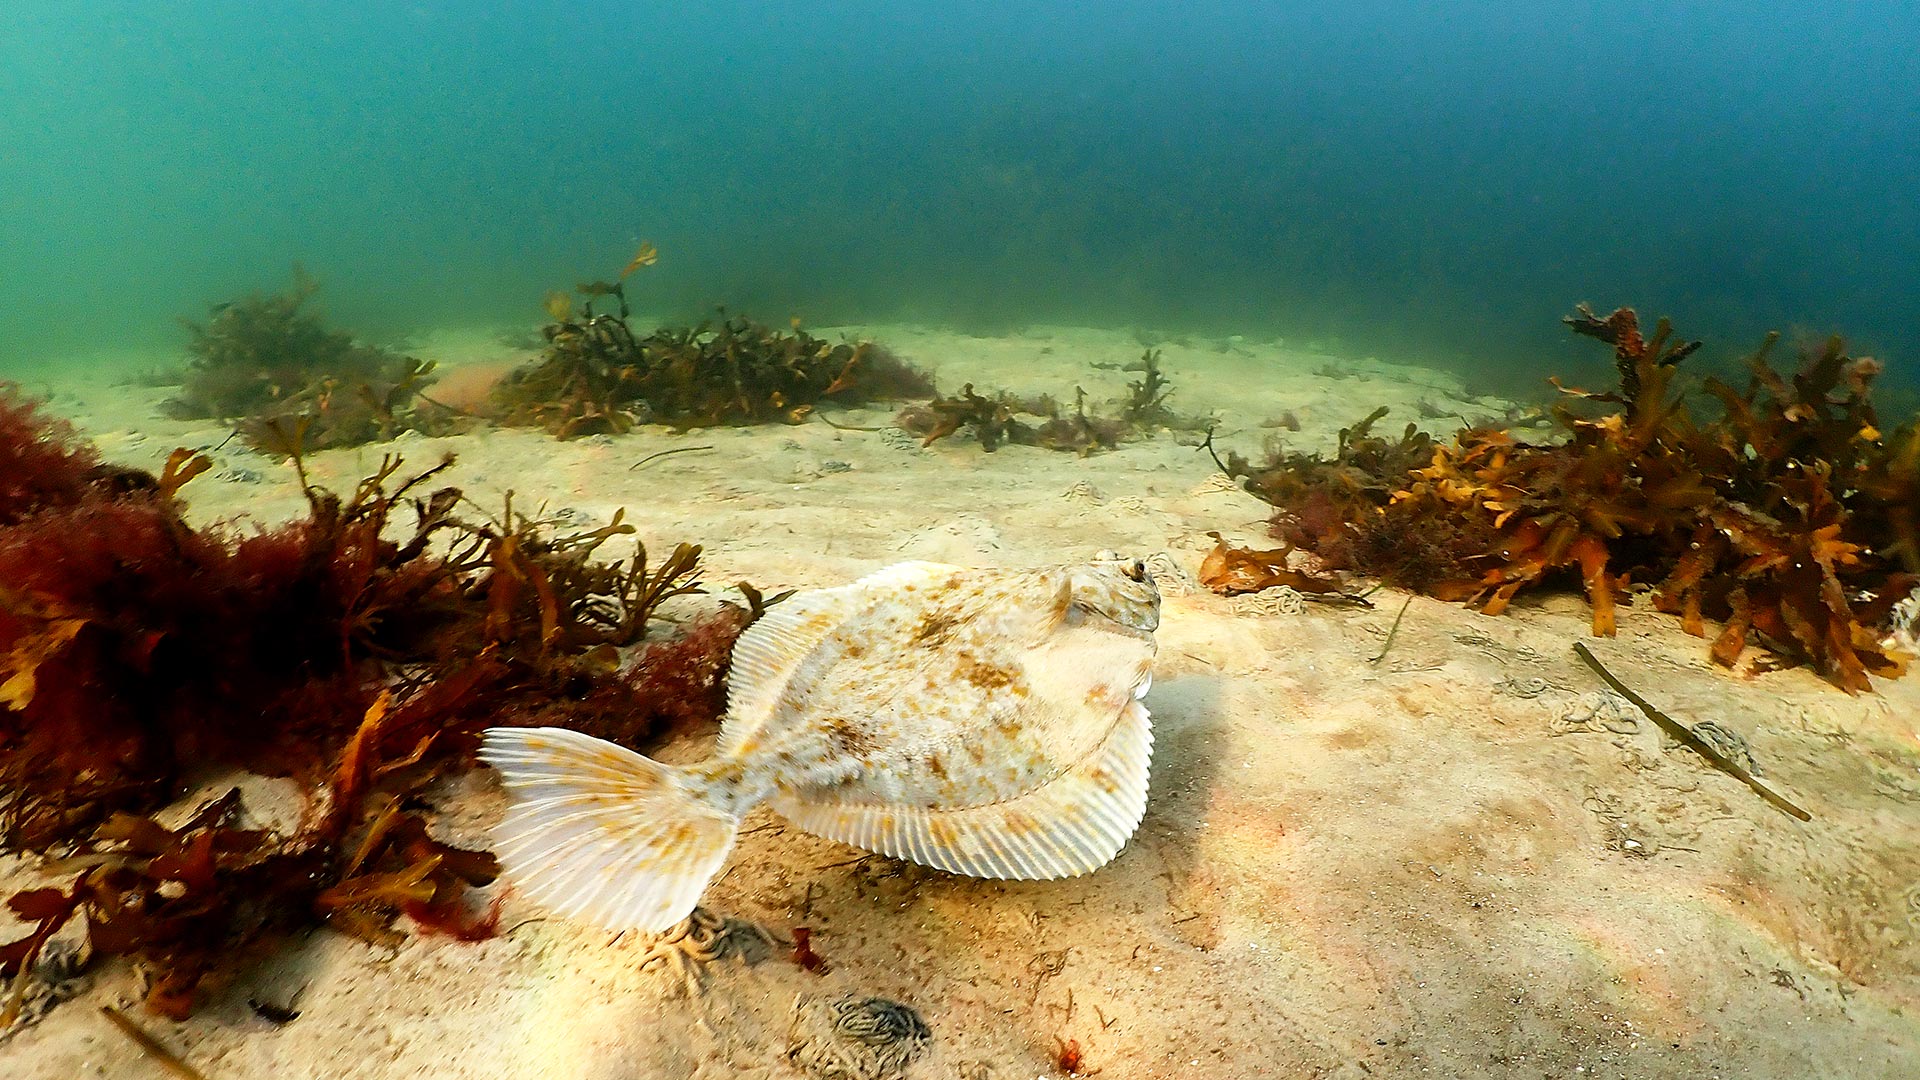 Plaice on healthy seabed in Oresund